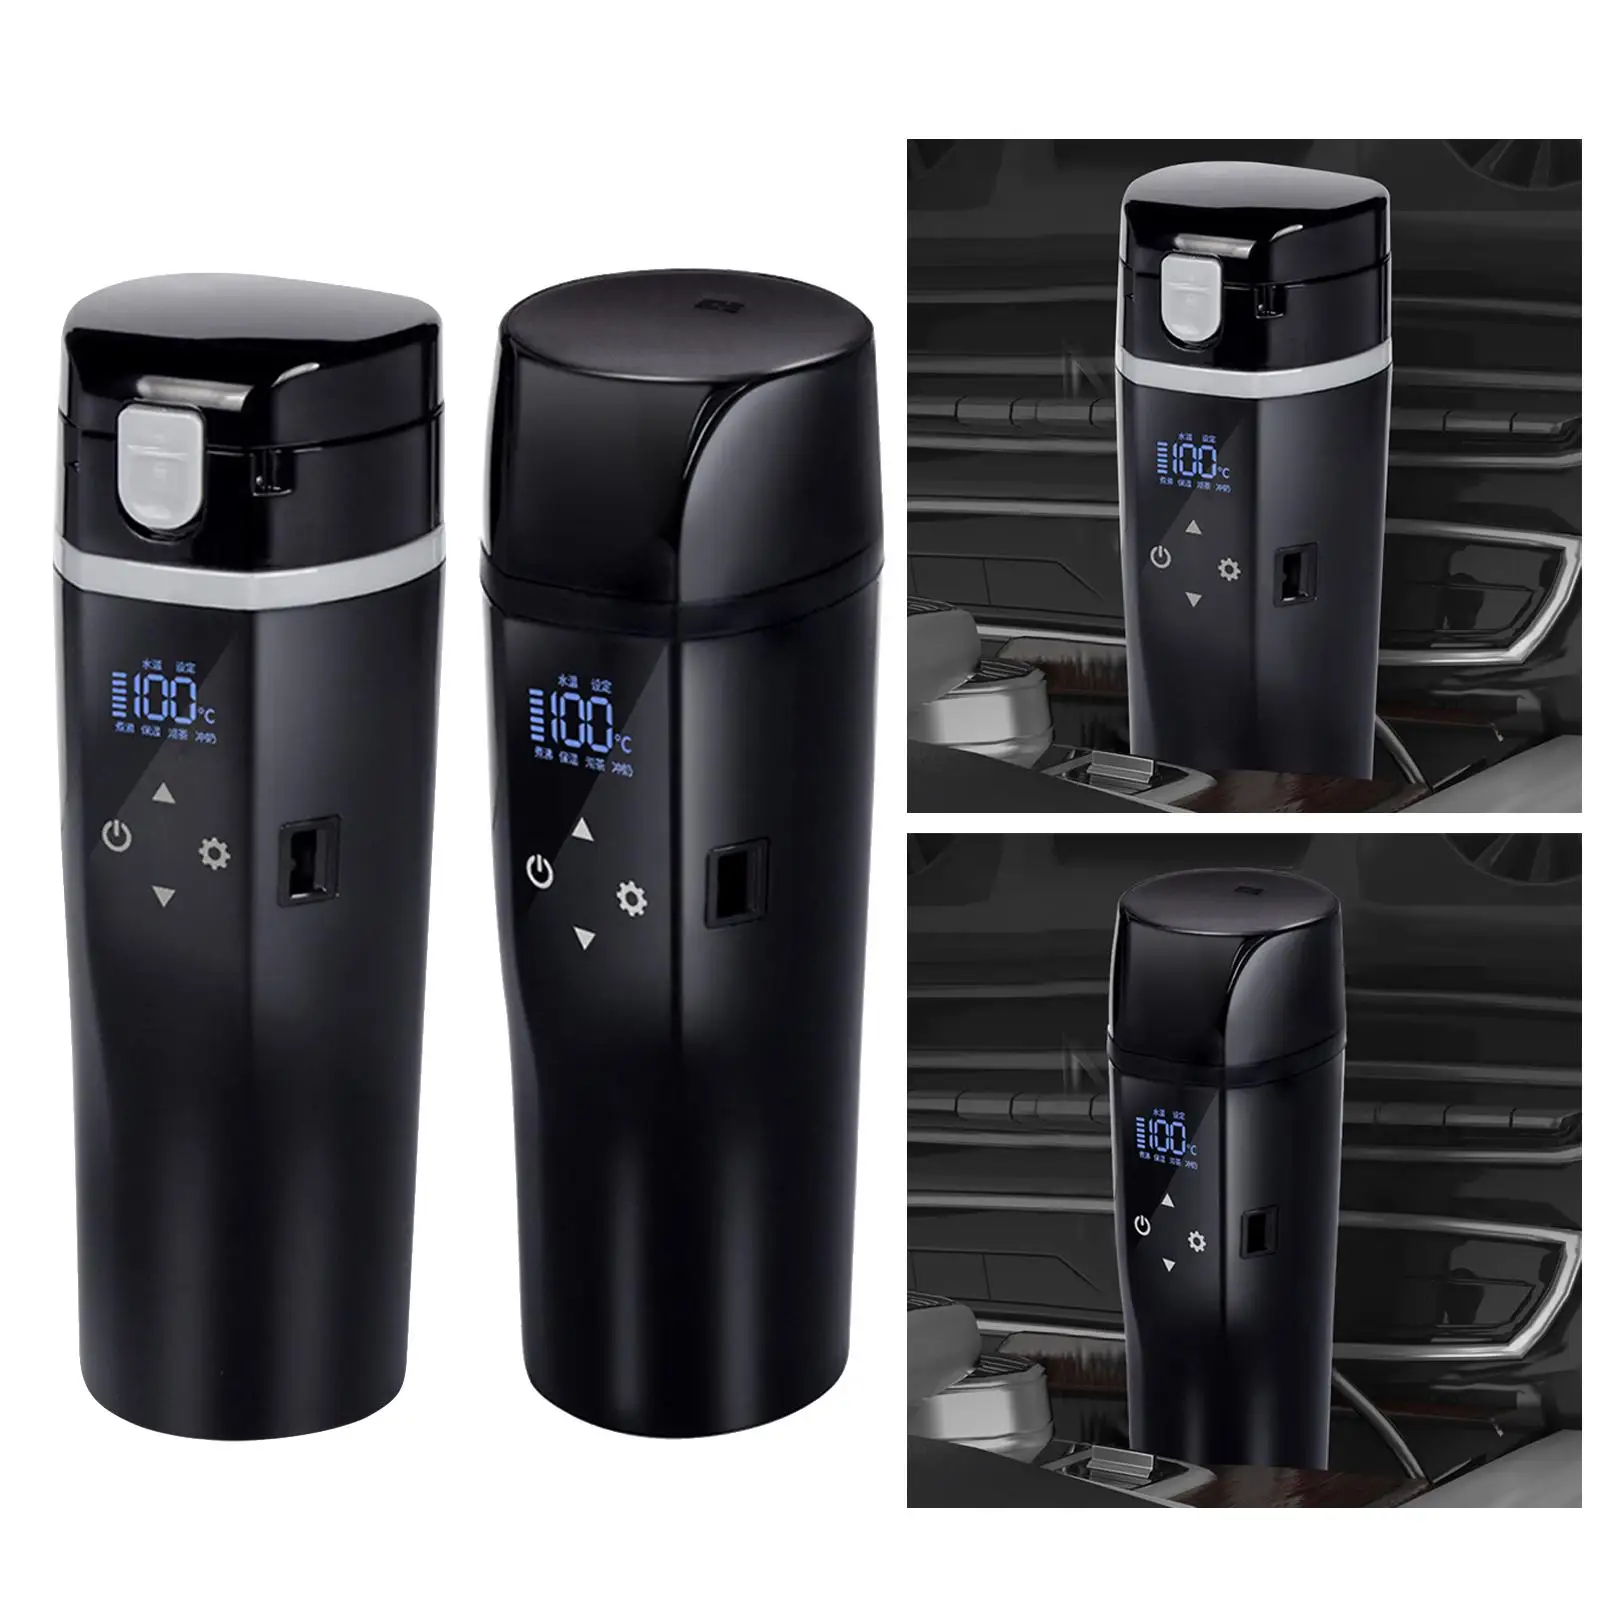 Car Kettle Heating 12V/24V Digital Display Touch Control 450ml Fits for Travel Auto Shut Off Tea Coffee Cigarette Lighter